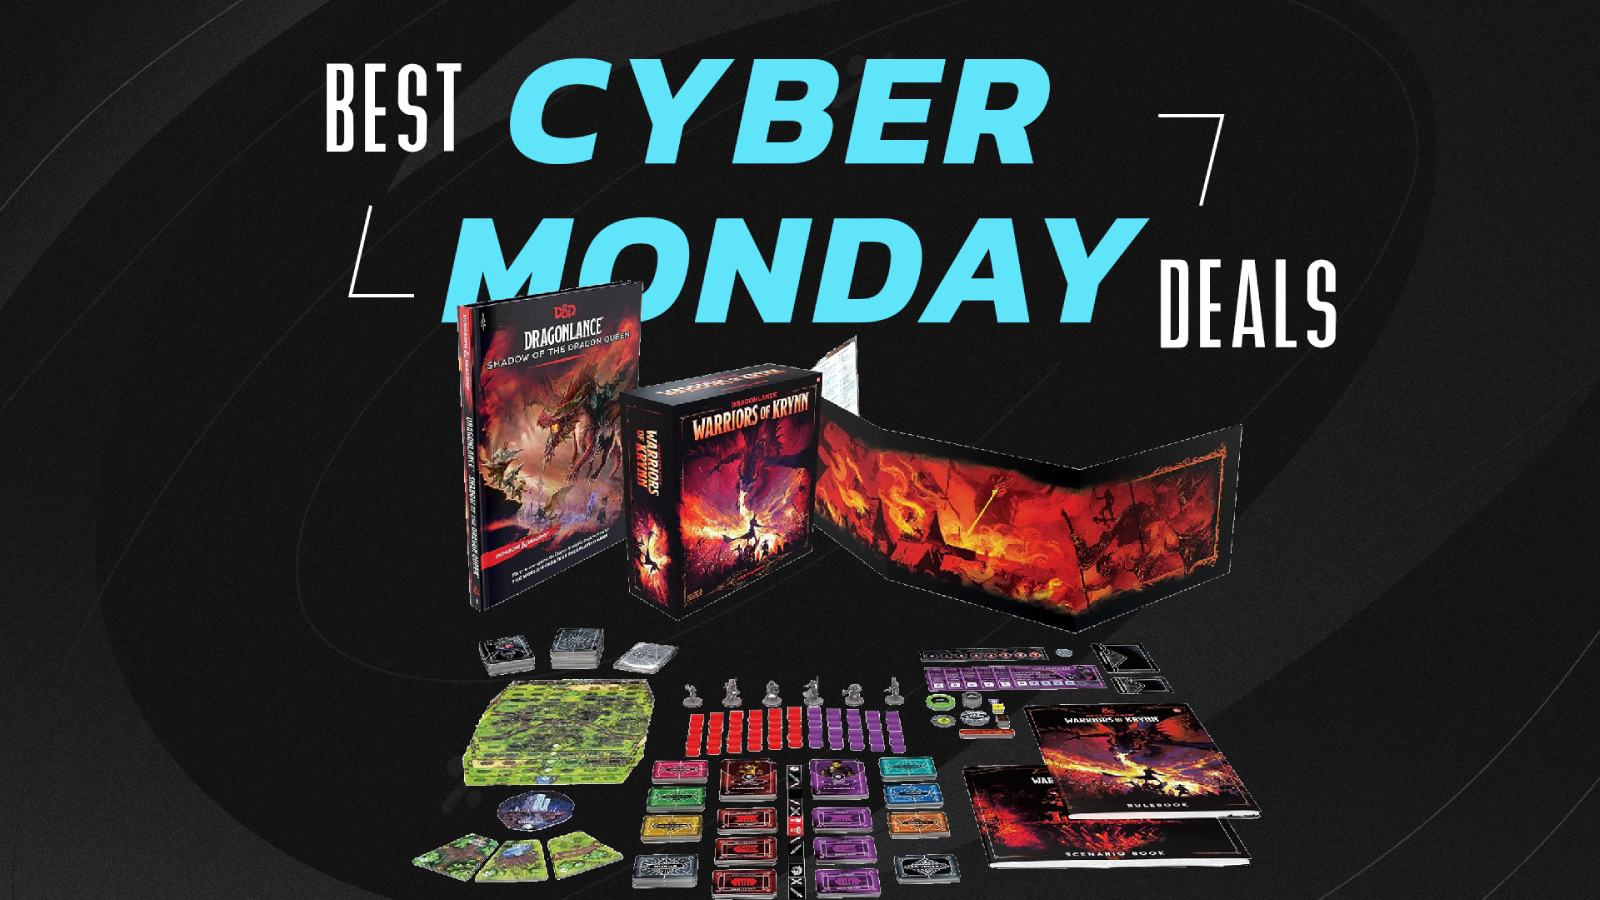 D&D Draognlance deluxe edition on cyber monday background